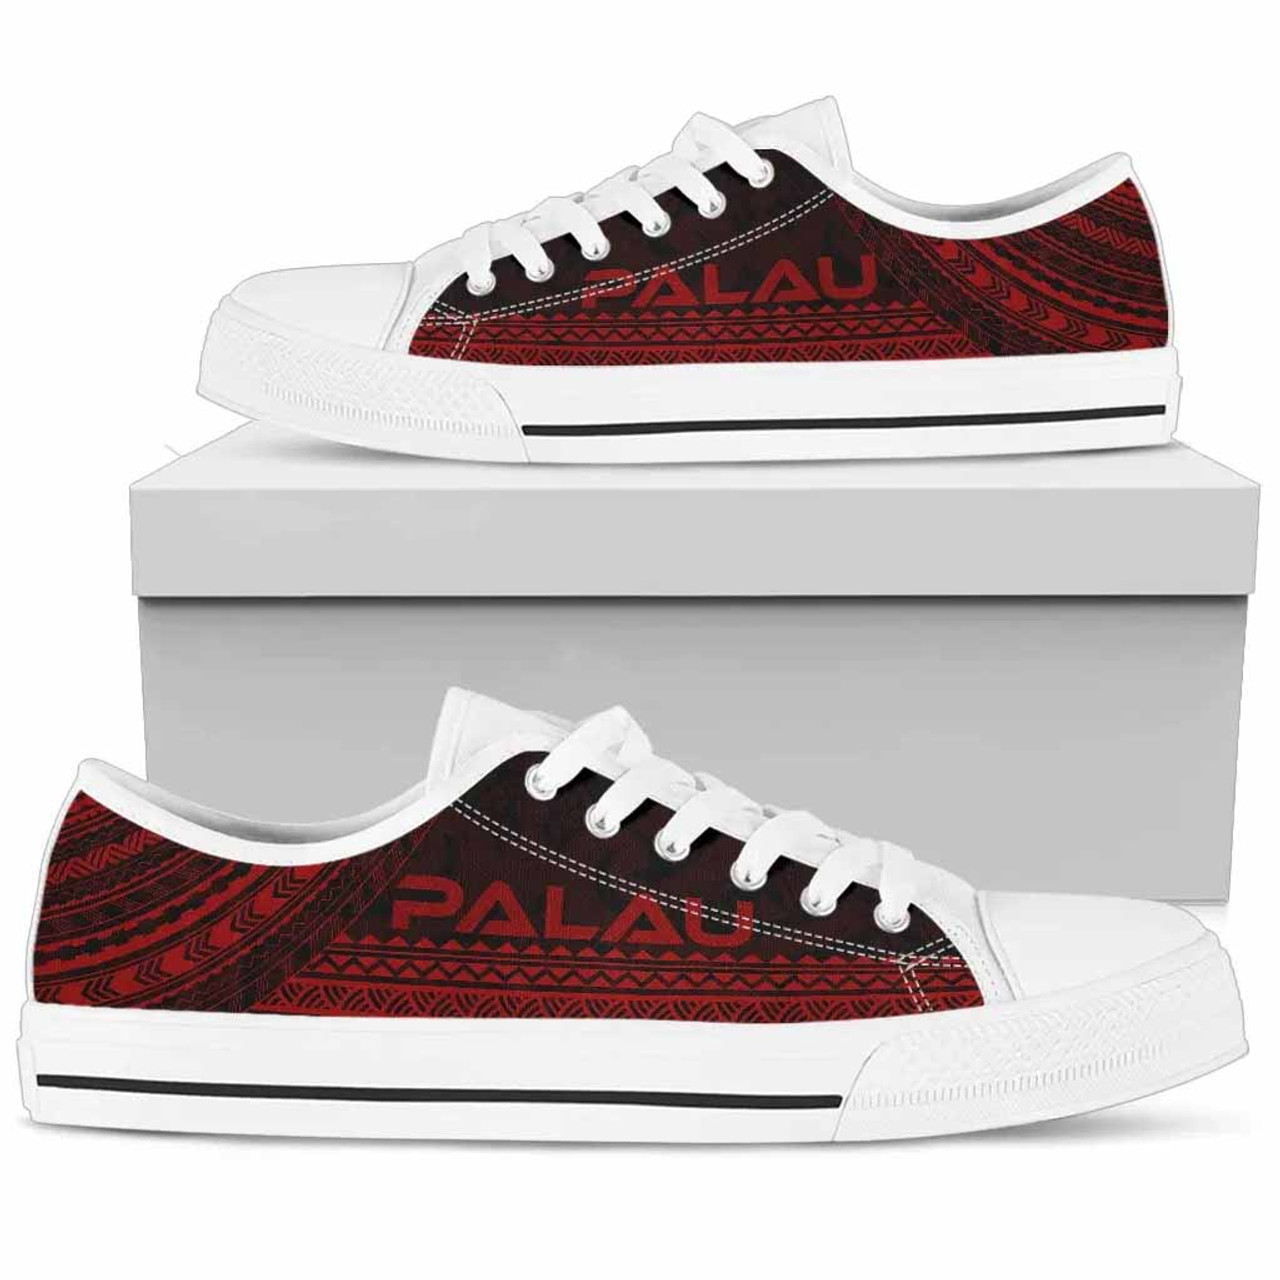 Palau Low Top Shoes - Polynesian Red Chief Version 1